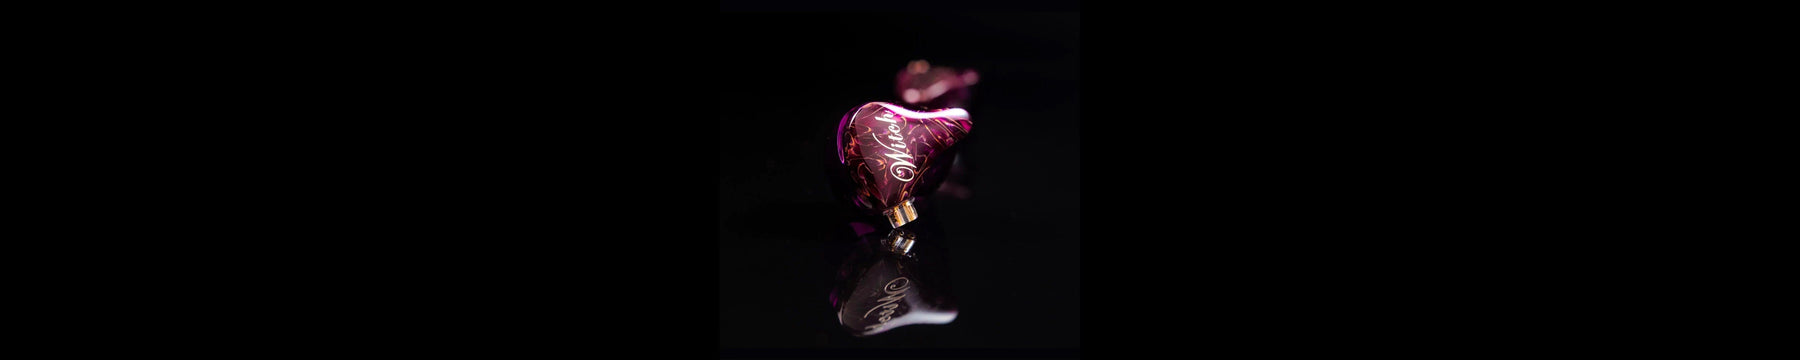 Open Audio Introduces "Witch Pro": Dual-Driver Hybrid IEMs With Handmade Face Covers